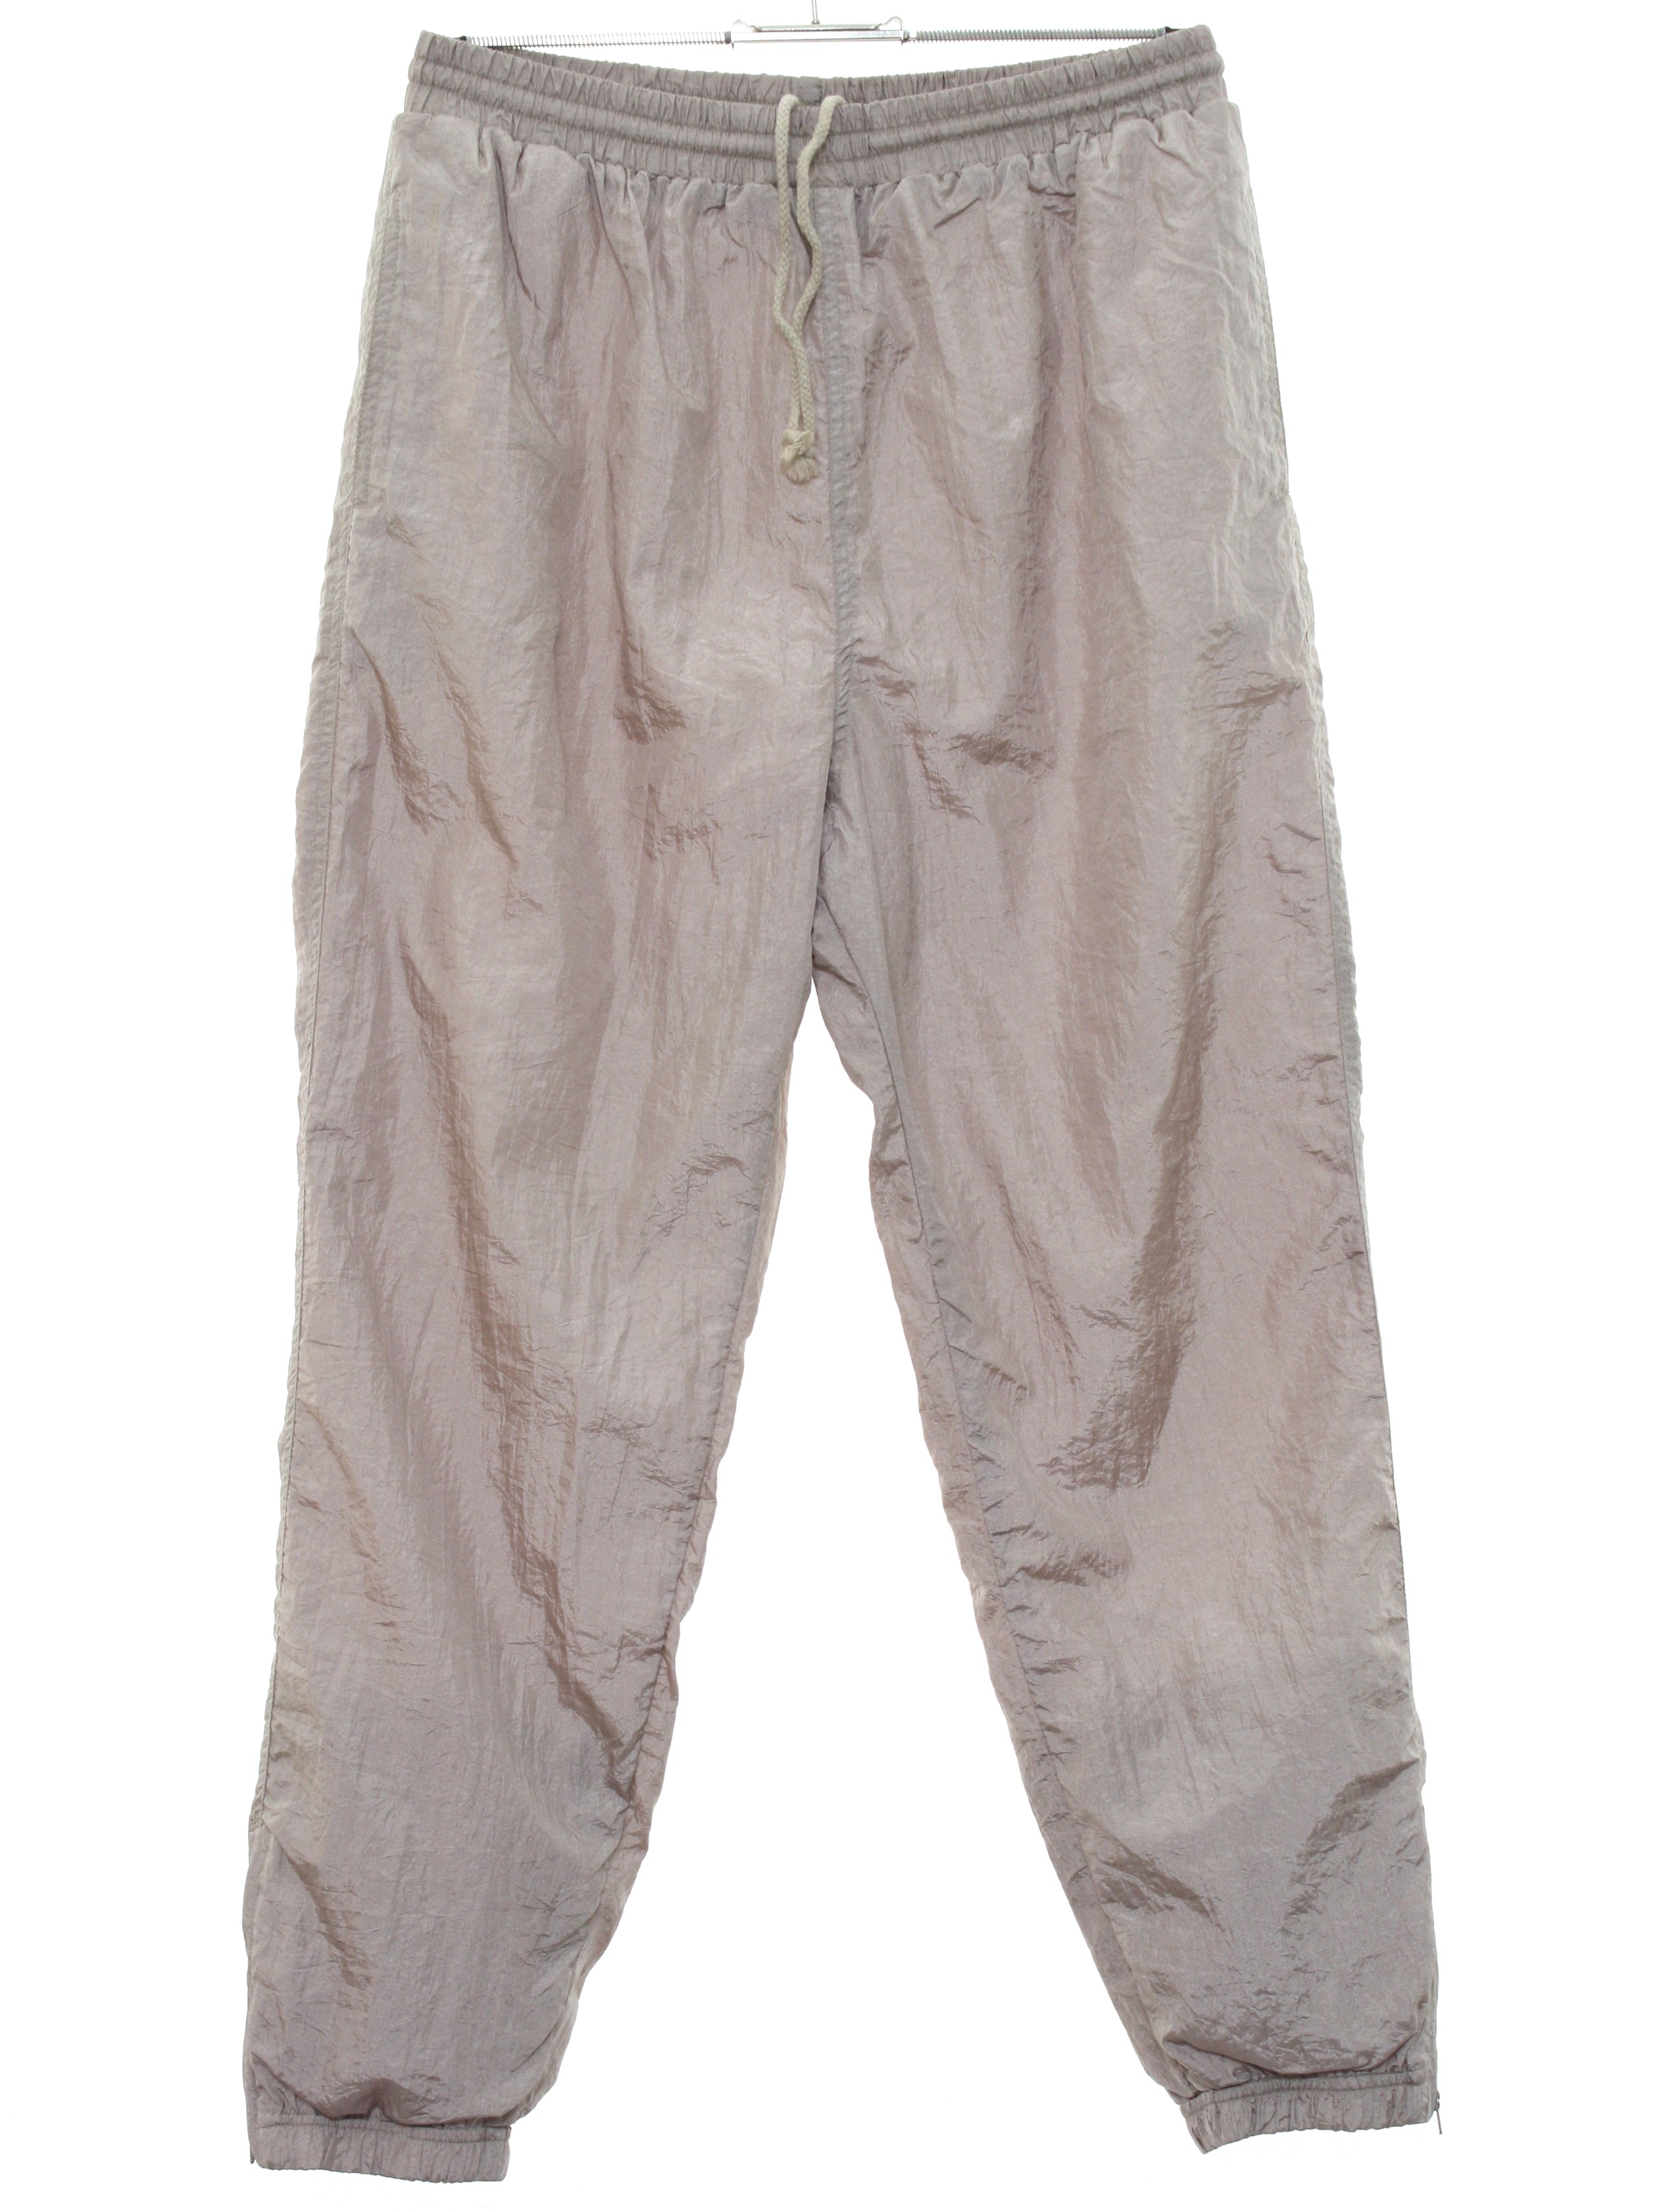 Care Label Eighties Vintage Pants: 80s -Care Label- Womens shiny light ...